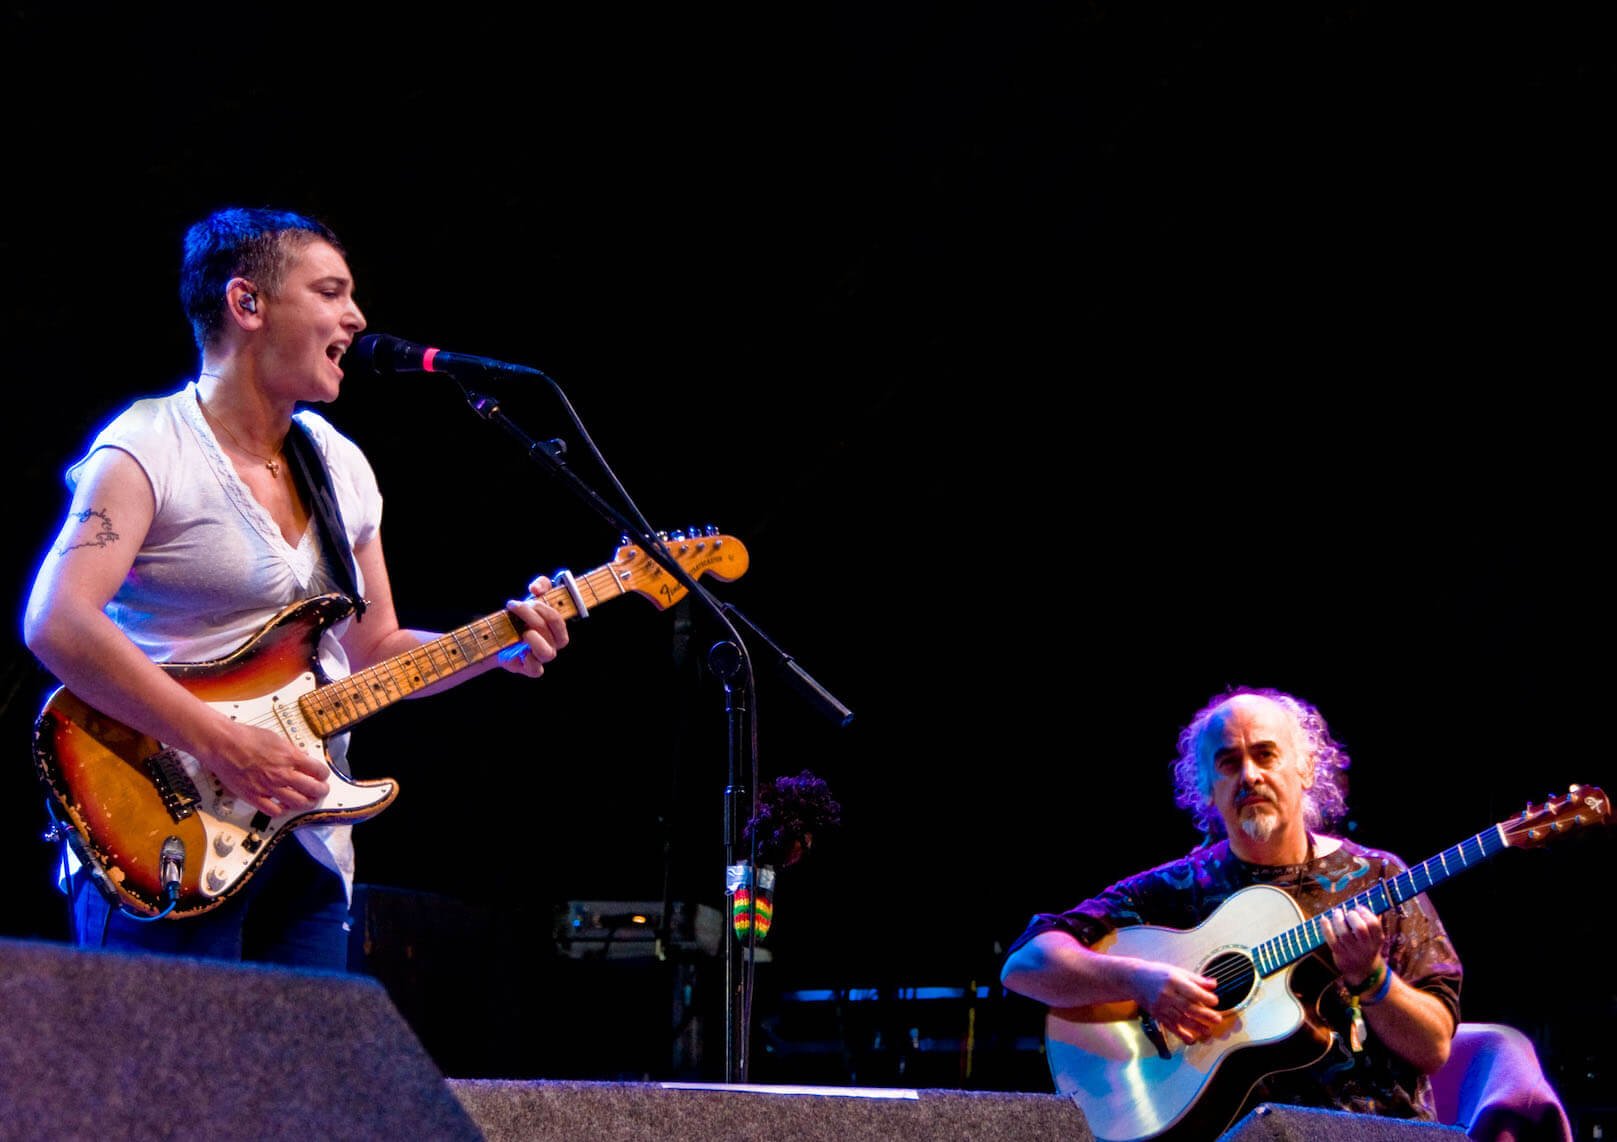 Sinead O'Connor and her husband, Steve Cooney, performing together on stage